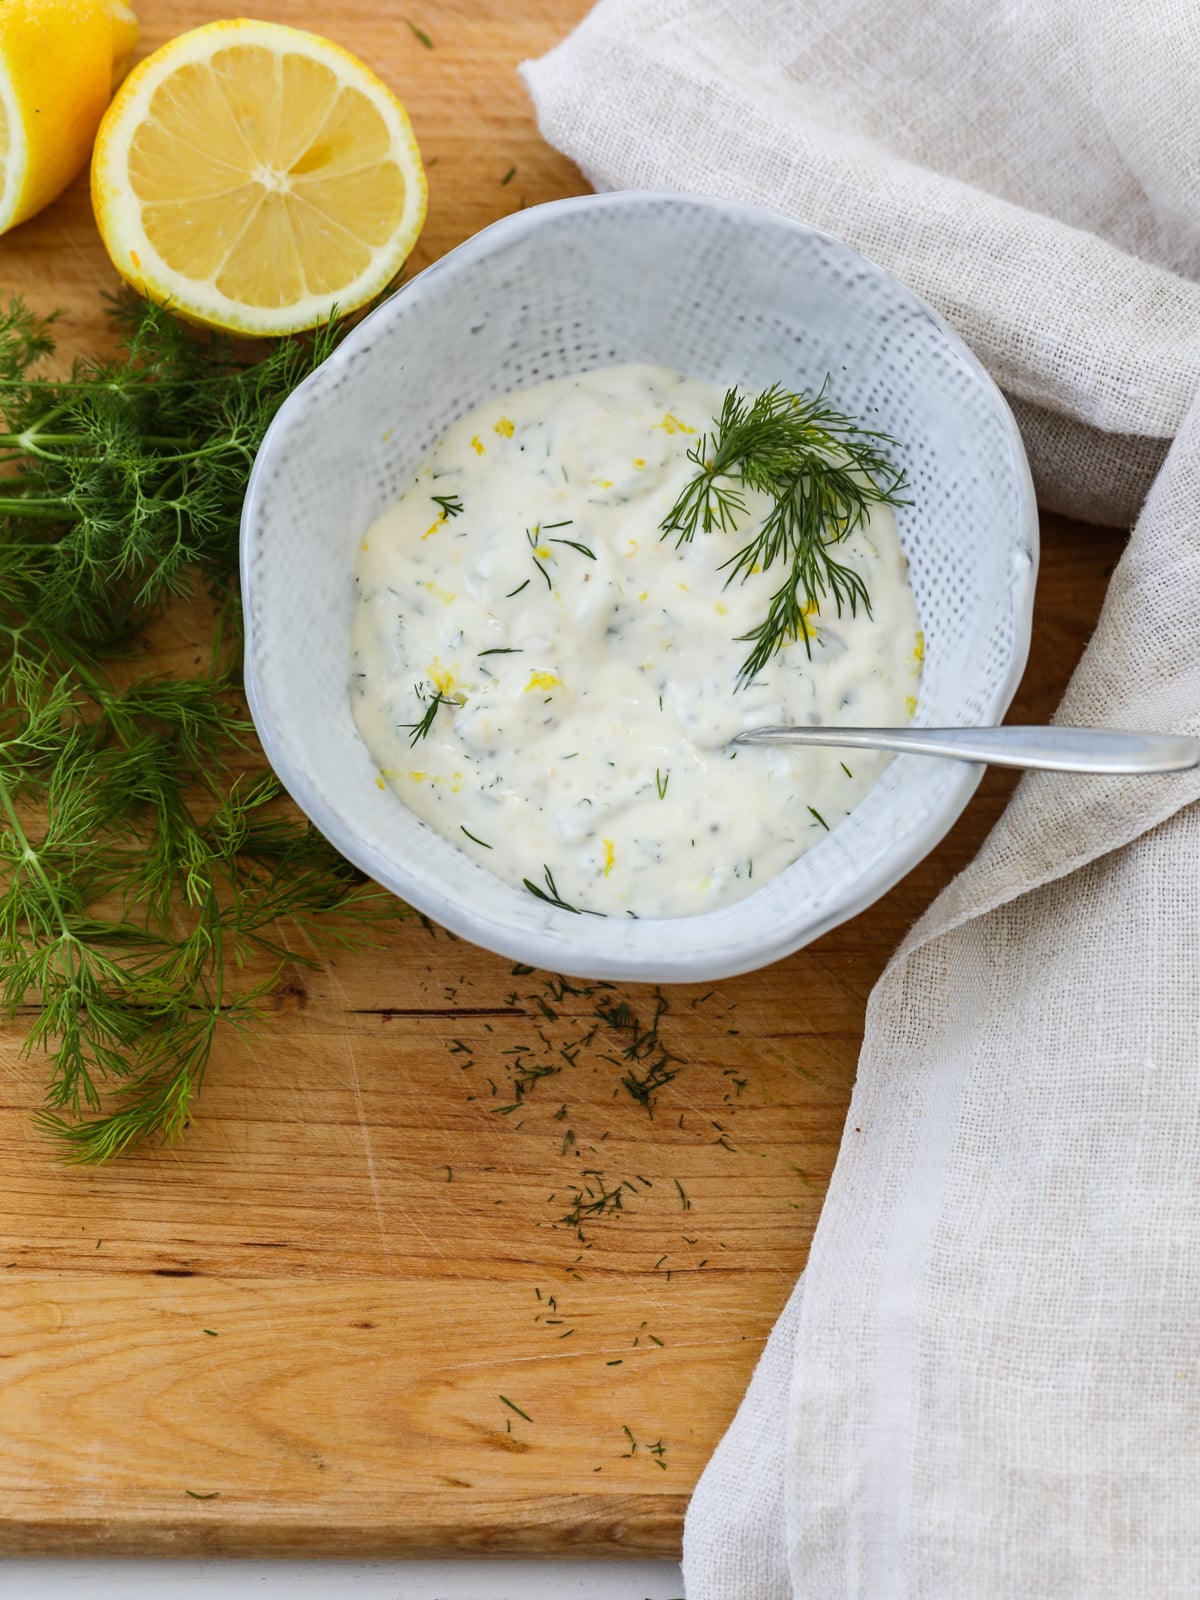 A small silver spoon in a white bowl of seafood sauce garnished with lemon and dill.